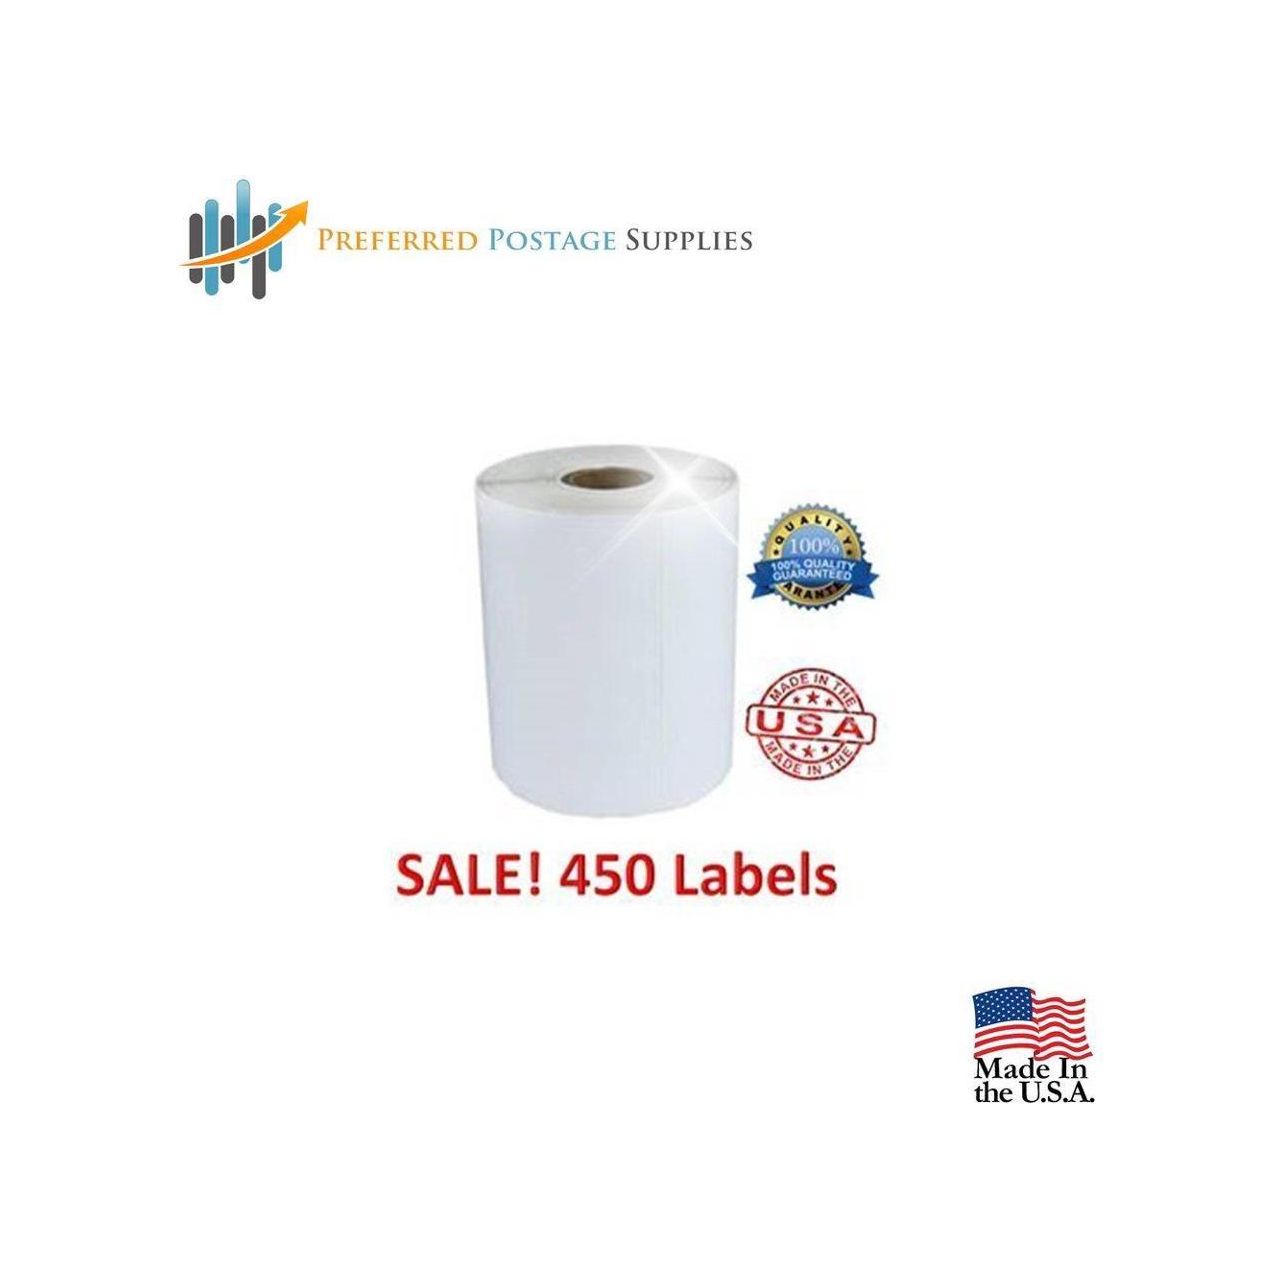 2 Rolls of 450 Labels Each (Made in U.S.A.) 4x6 Direct Thermal for Zebra 2844 ZP-450 ZP-500 ZP-505 Shipping Labels Perfect Roll For 1 Inch Core Thermal Laser Prientrs Moorescarts